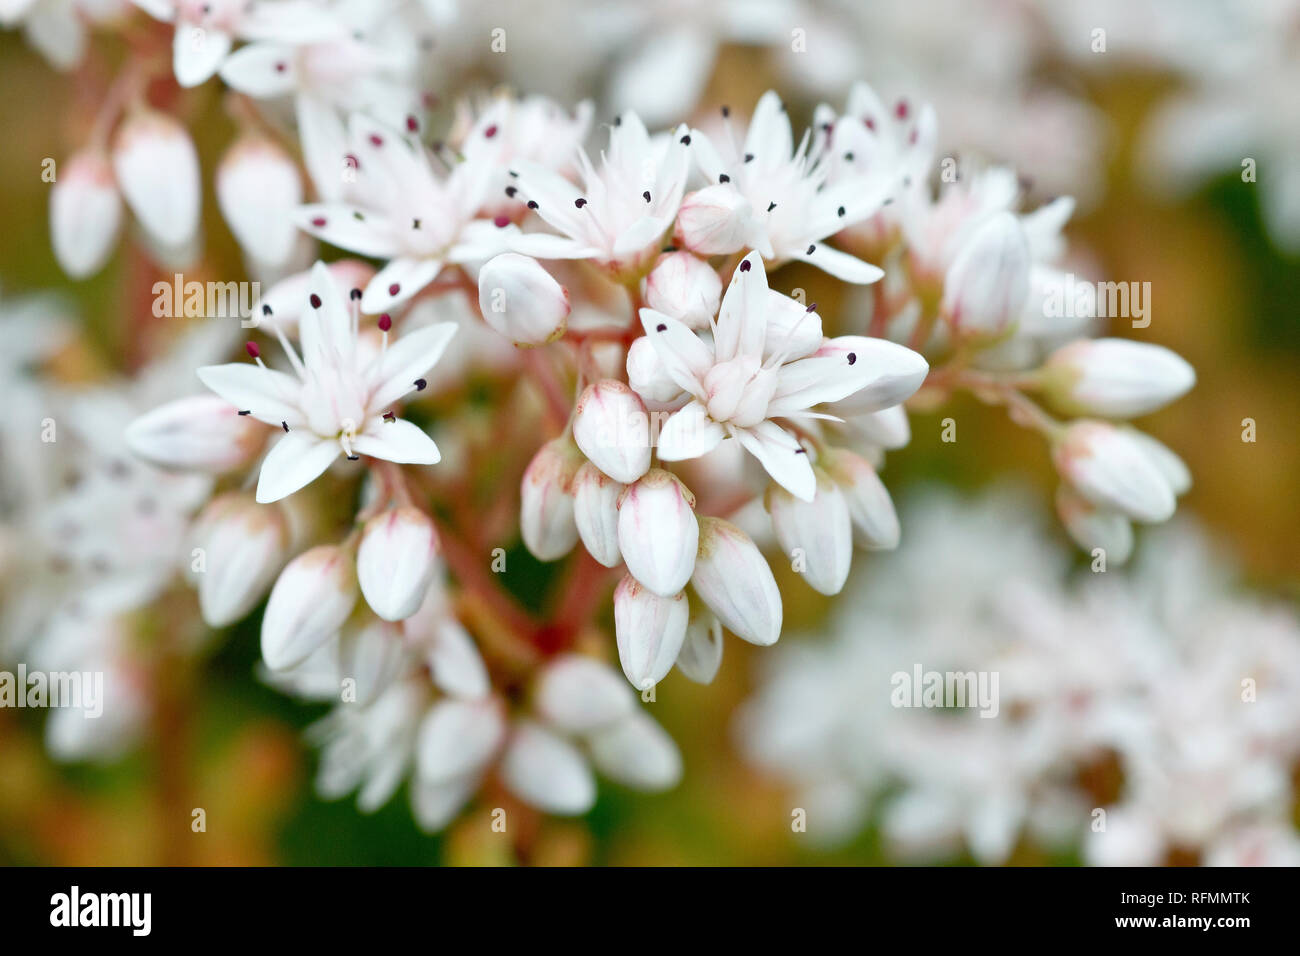 White Stonecrop (sedum album), close up of a cluster of flowers and buds. Stock Photo